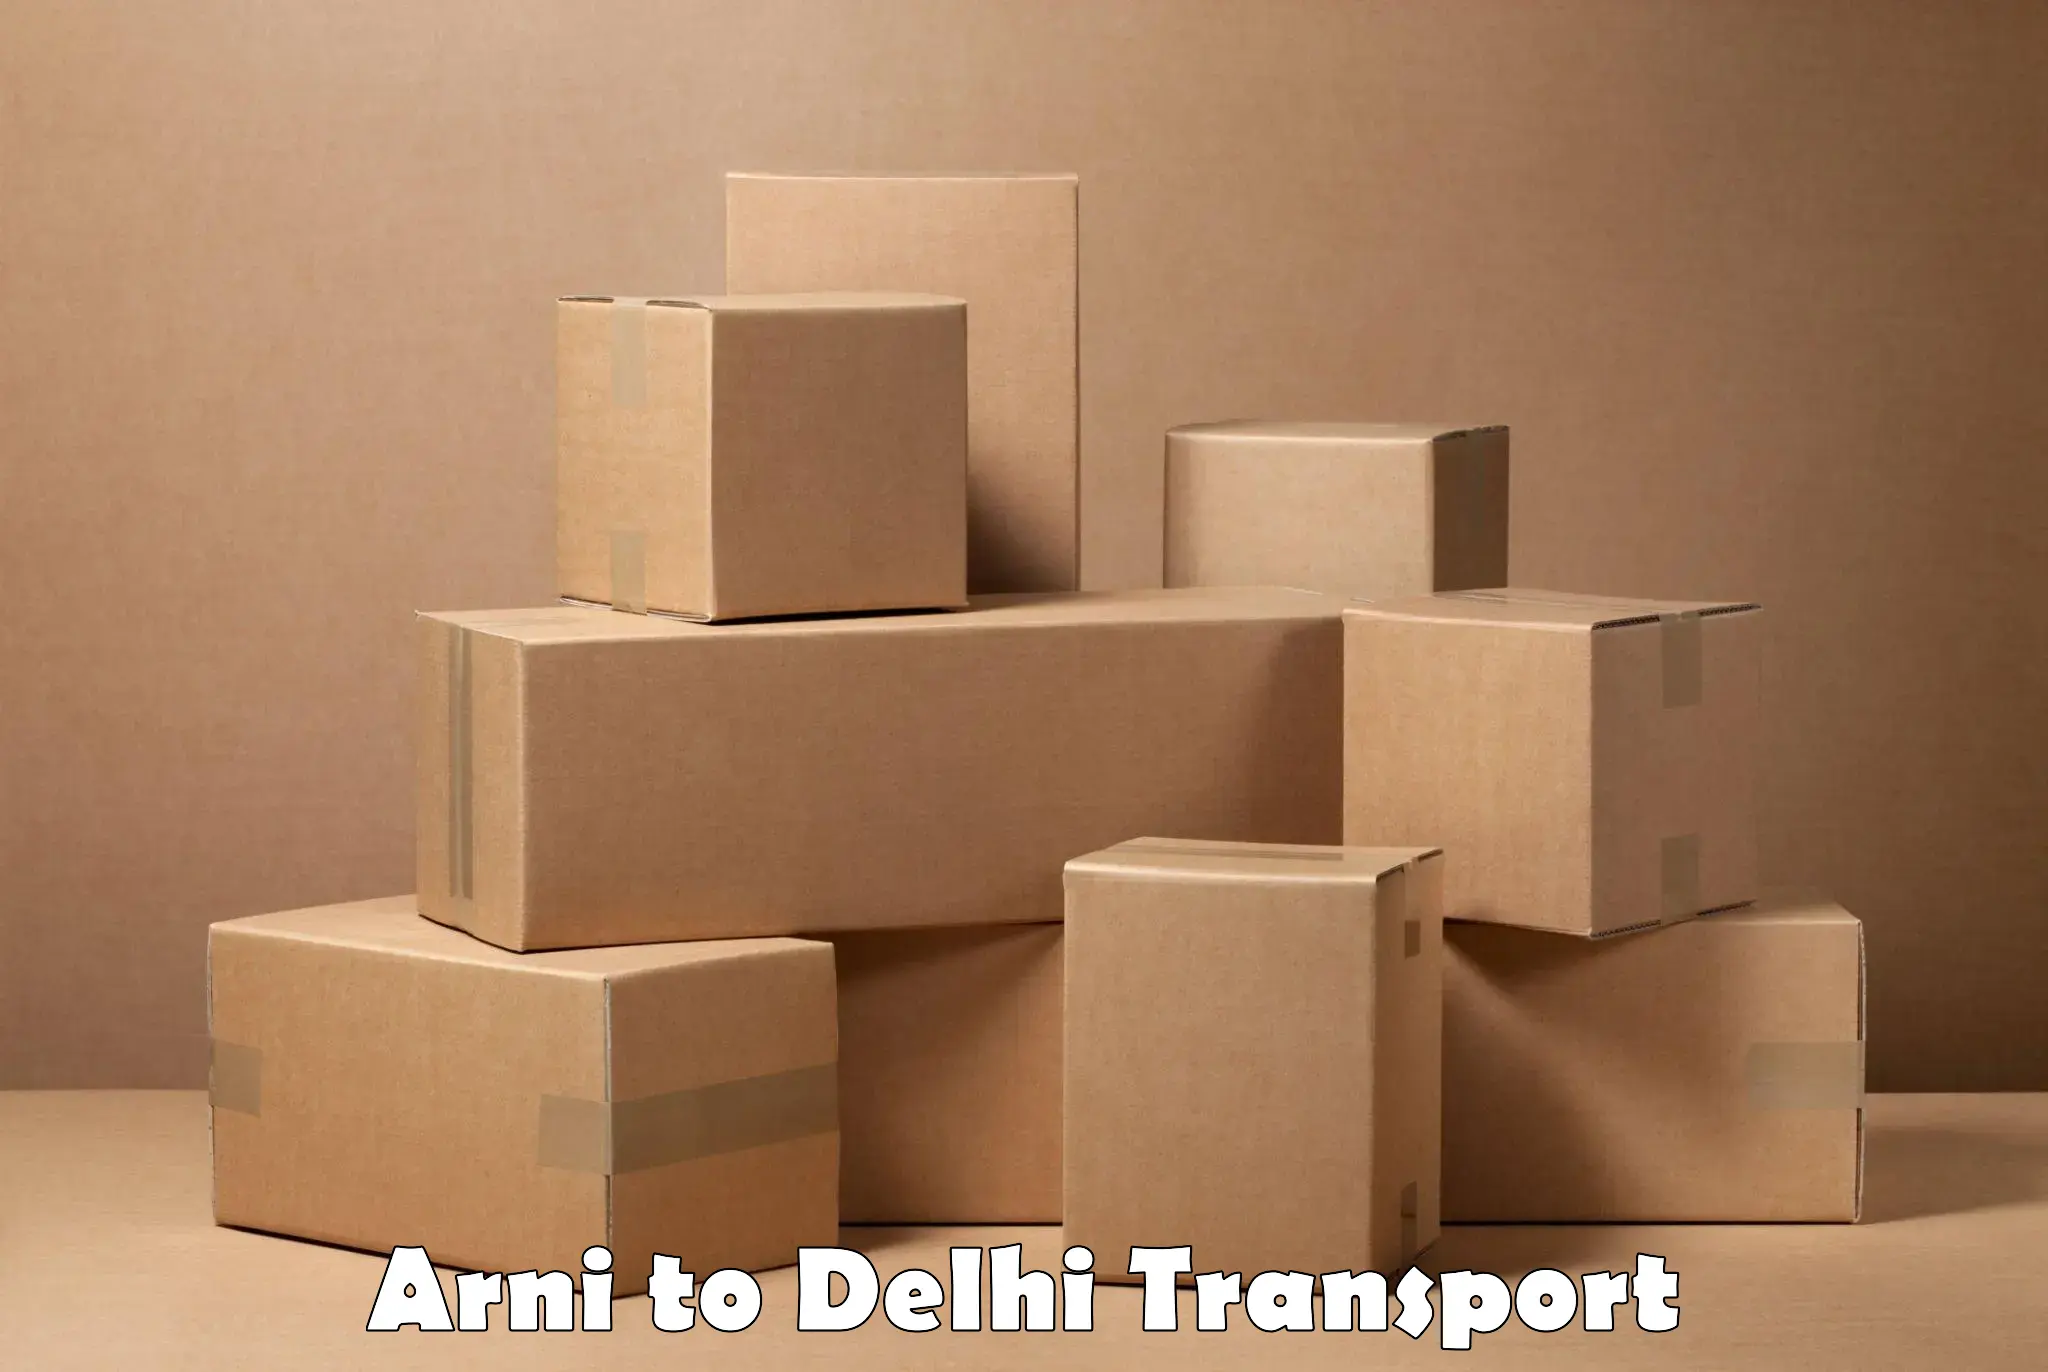 Truck transport companies in India Arni to NCR